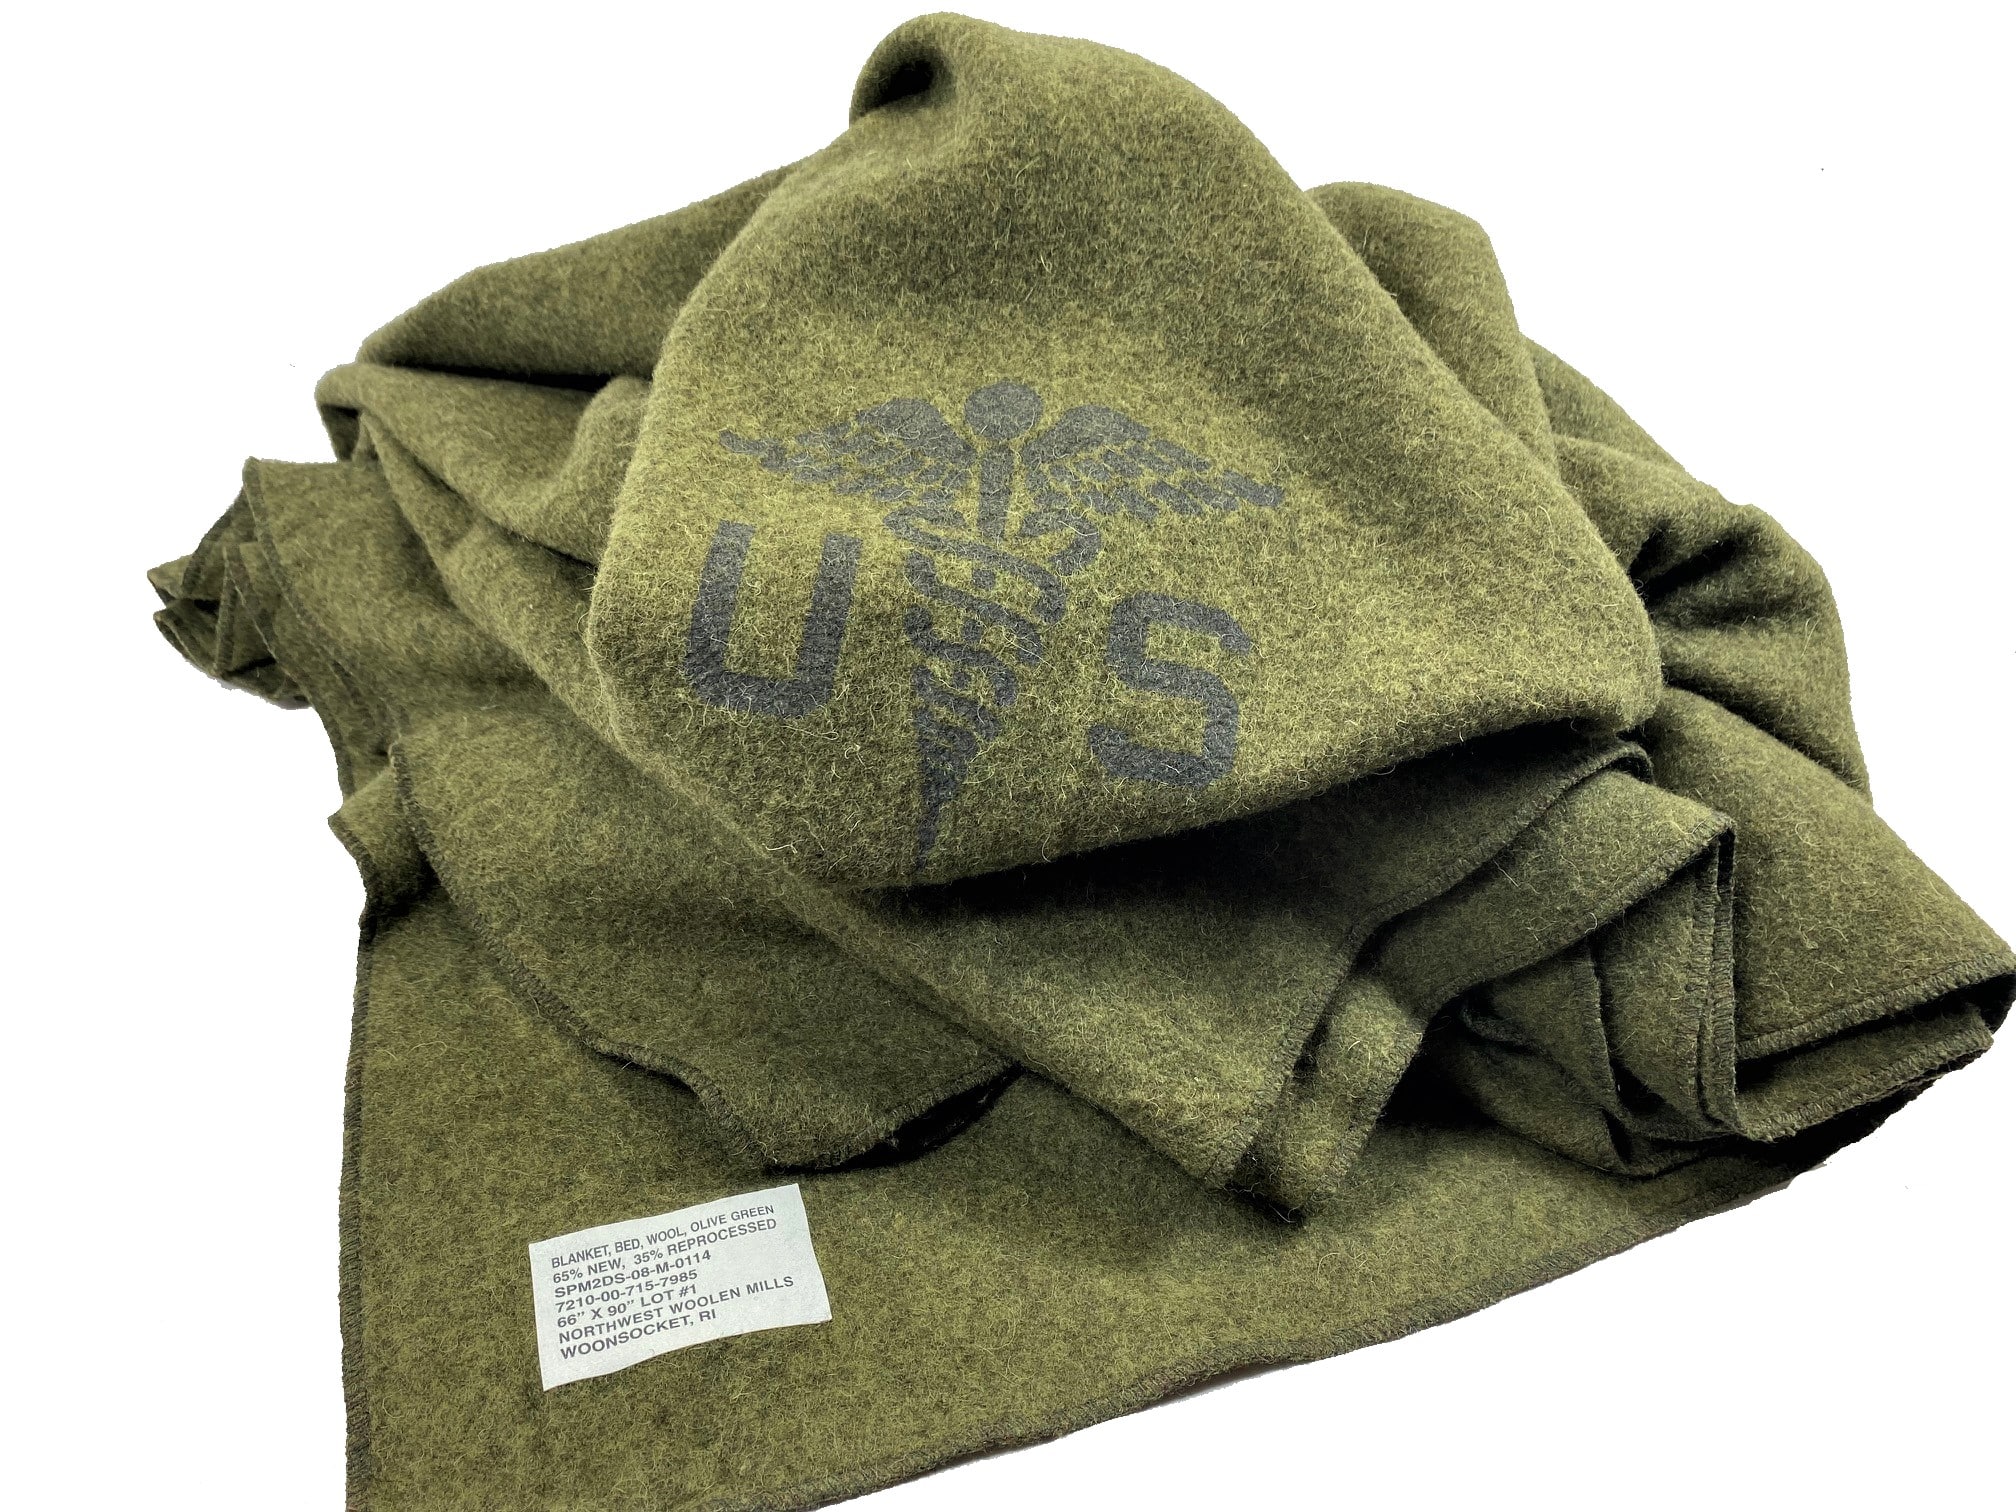 Army Navy Surplus Wool Blankets: Quality, Durability, and Versatility